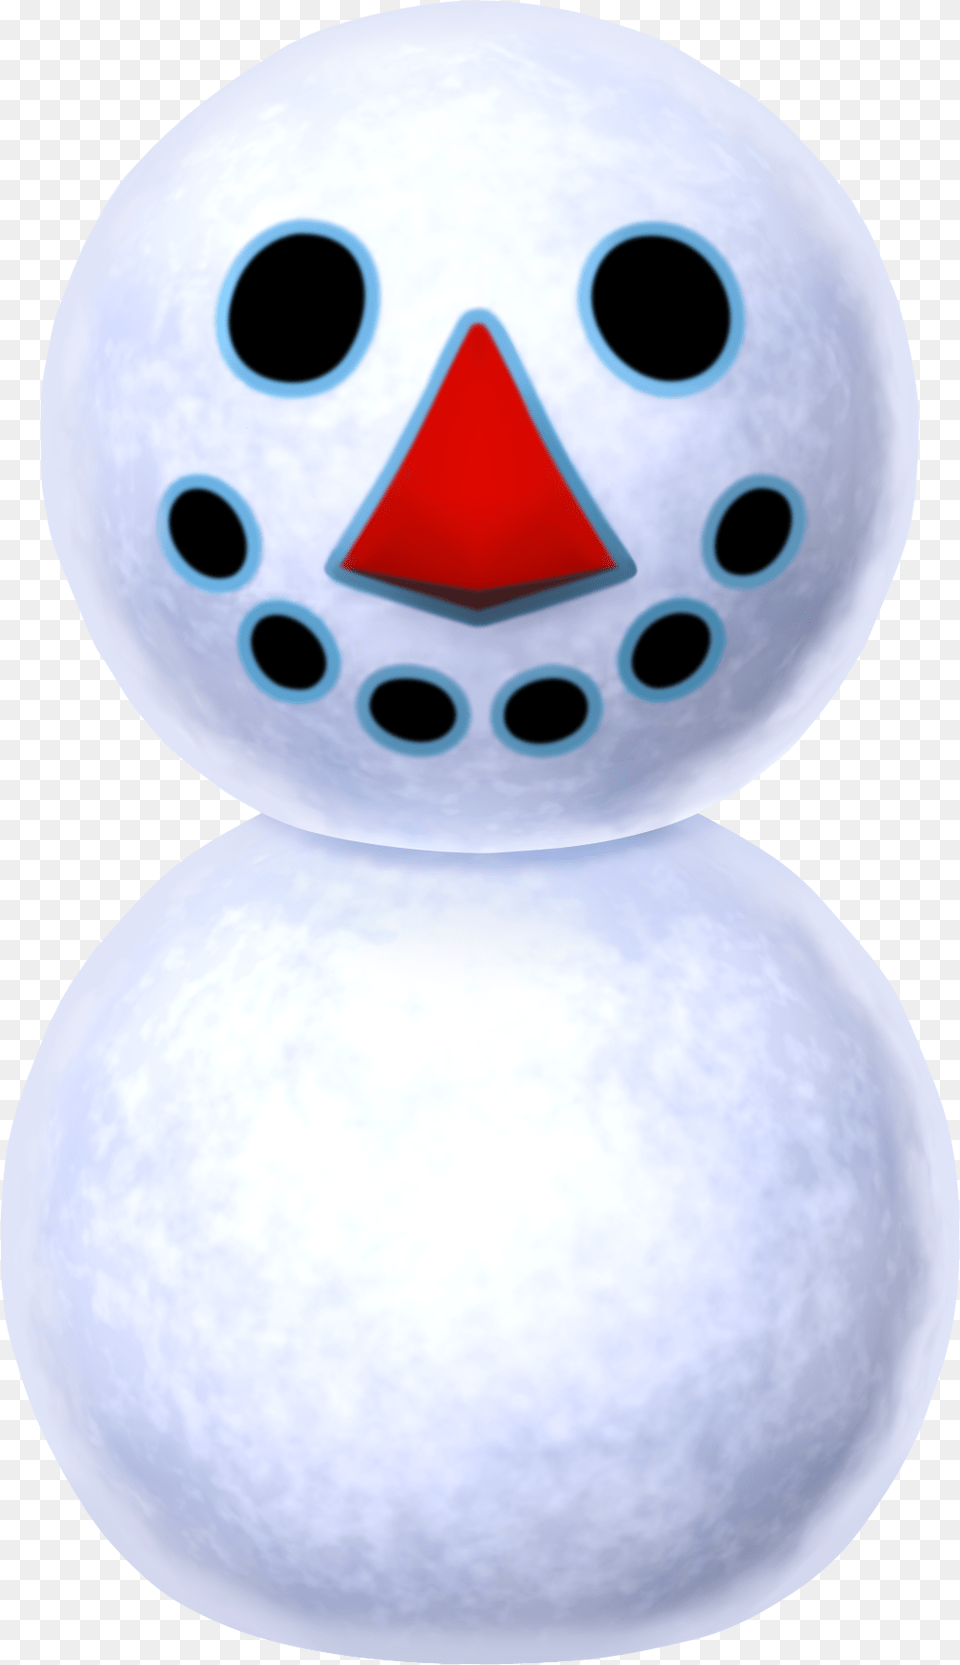 New Leaf Images Snowman Hd Wallpaper And Background Animal Crossing Snowman, Nature, Outdoors, Winter, Snow Free Transparent Png